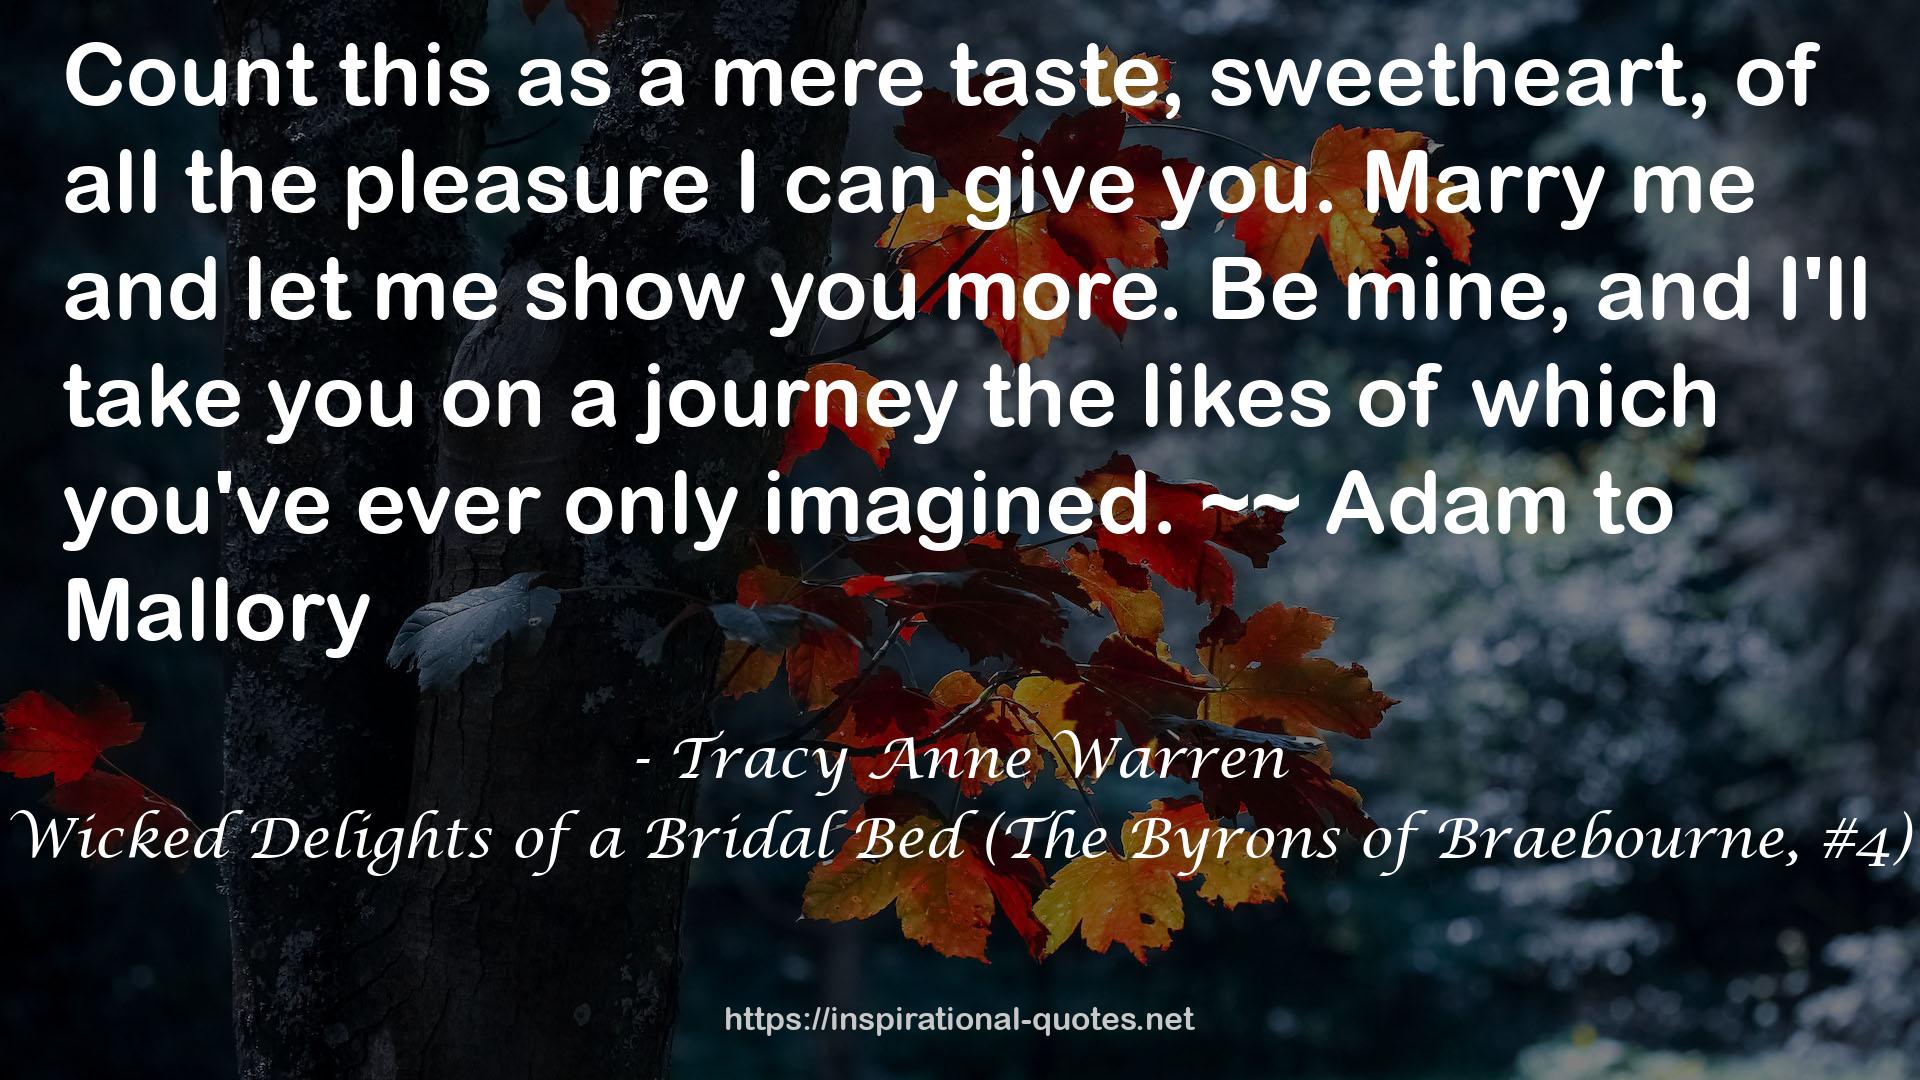 Wicked Delights of a Bridal Bed (The Byrons of Braebourne, #4) QUOTES